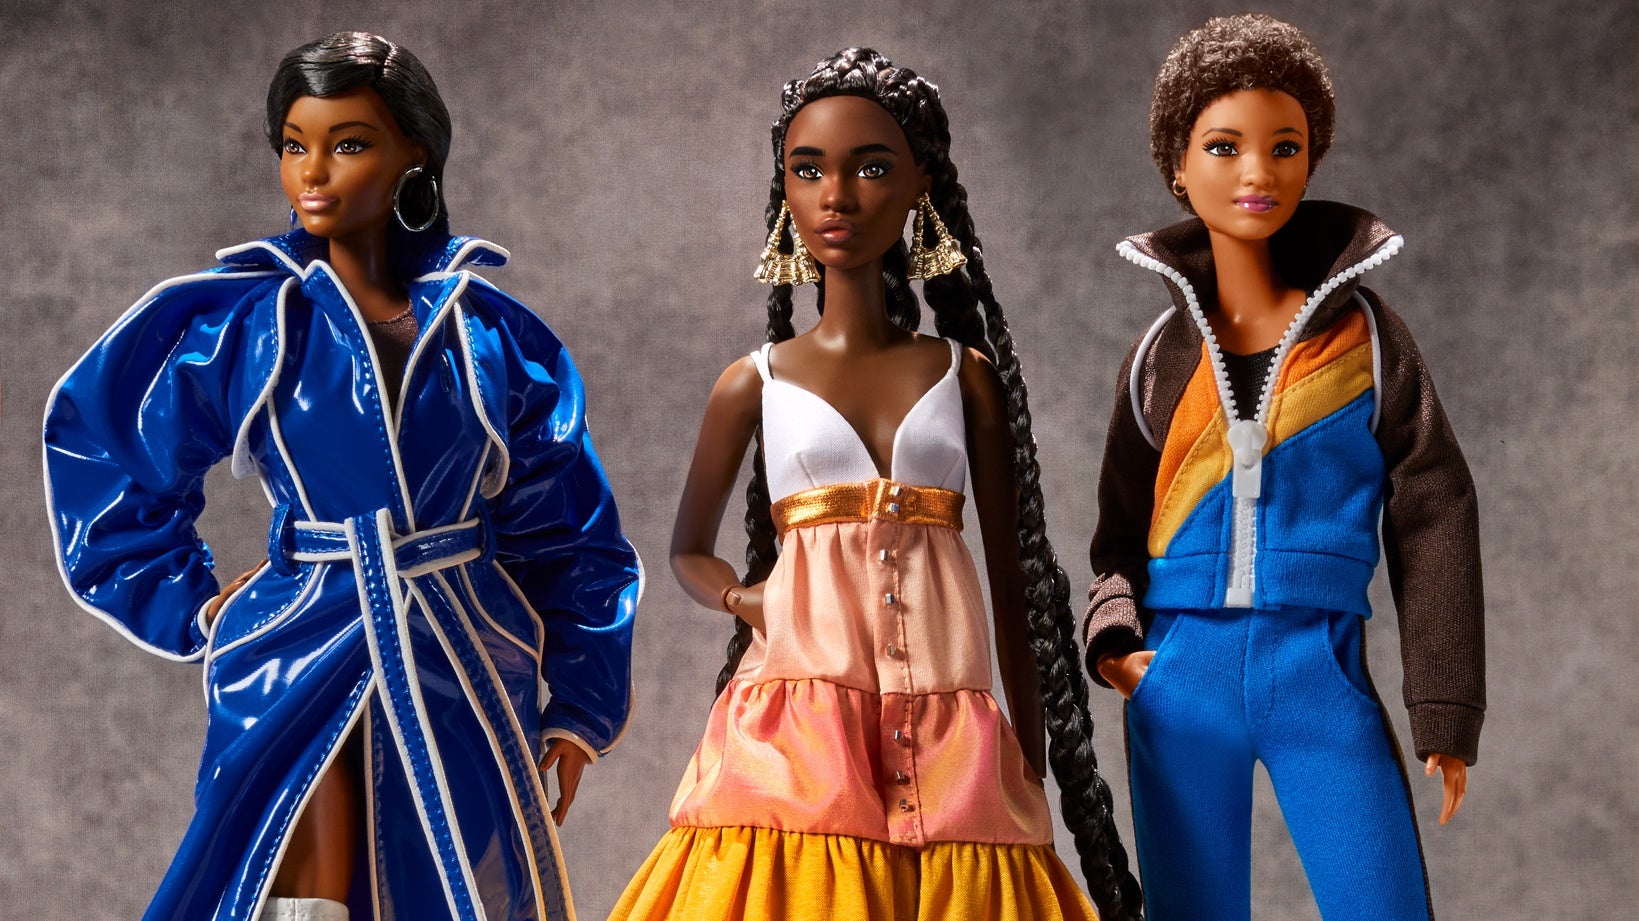 Harlem's Fashion Row Teams Up With Barbie For "Fresh-Off-The-Runway" Black History Month Partnership